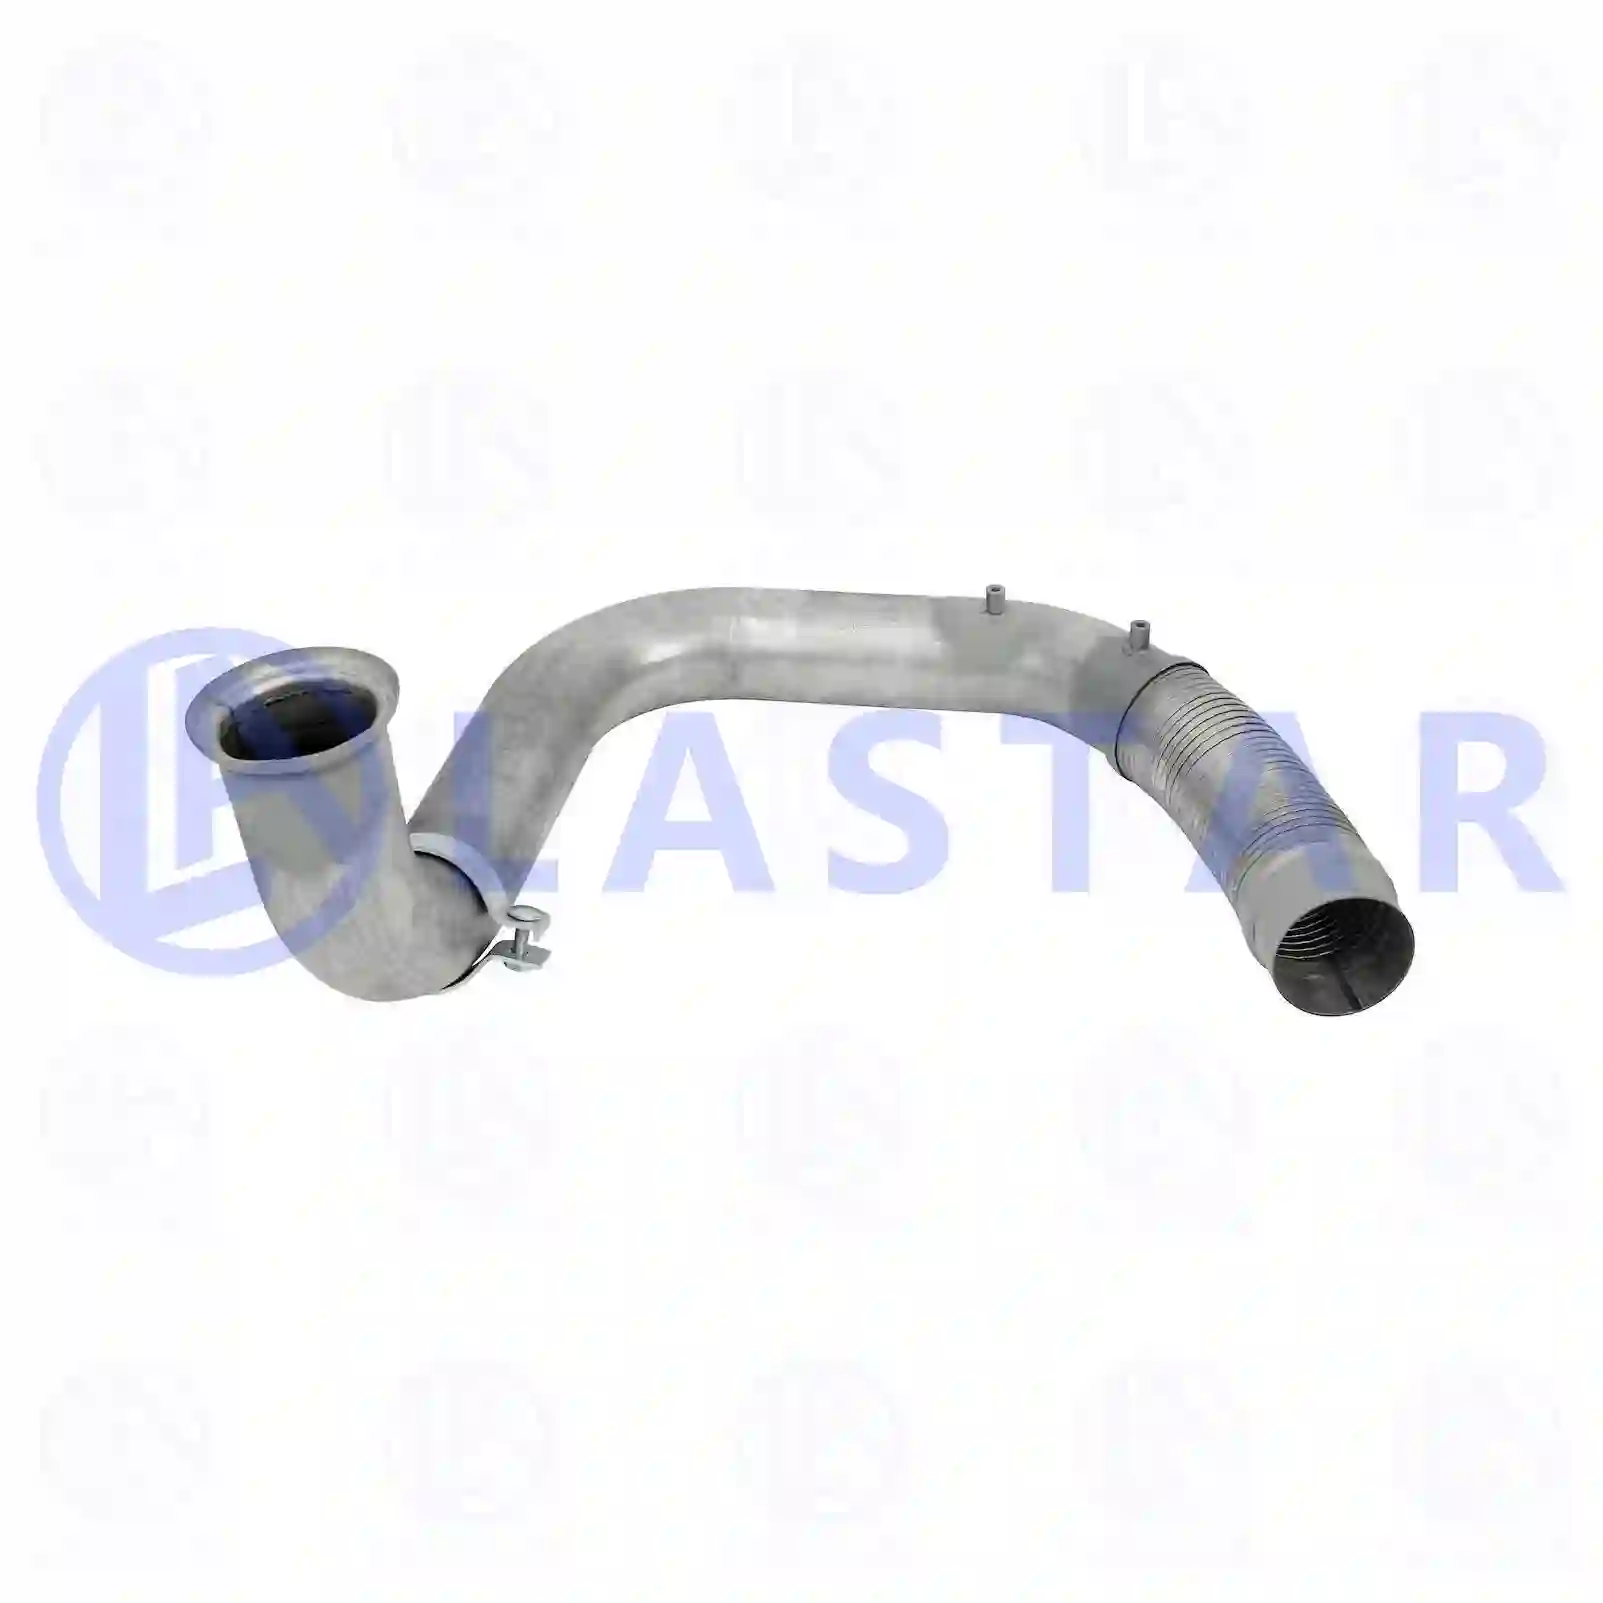 Exhaust pipe, 77706344, 9404900519, 9404901019, 9404920159, ZG10302-0008 ||  77706344 Lastar Spare Part | Truck Spare Parts, Auotomotive Spare Parts Exhaust pipe, 77706344, 9404900519, 9404901019, 9404920159, ZG10302-0008 ||  77706344 Lastar Spare Part | Truck Spare Parts, Auotomotive Spare Parts